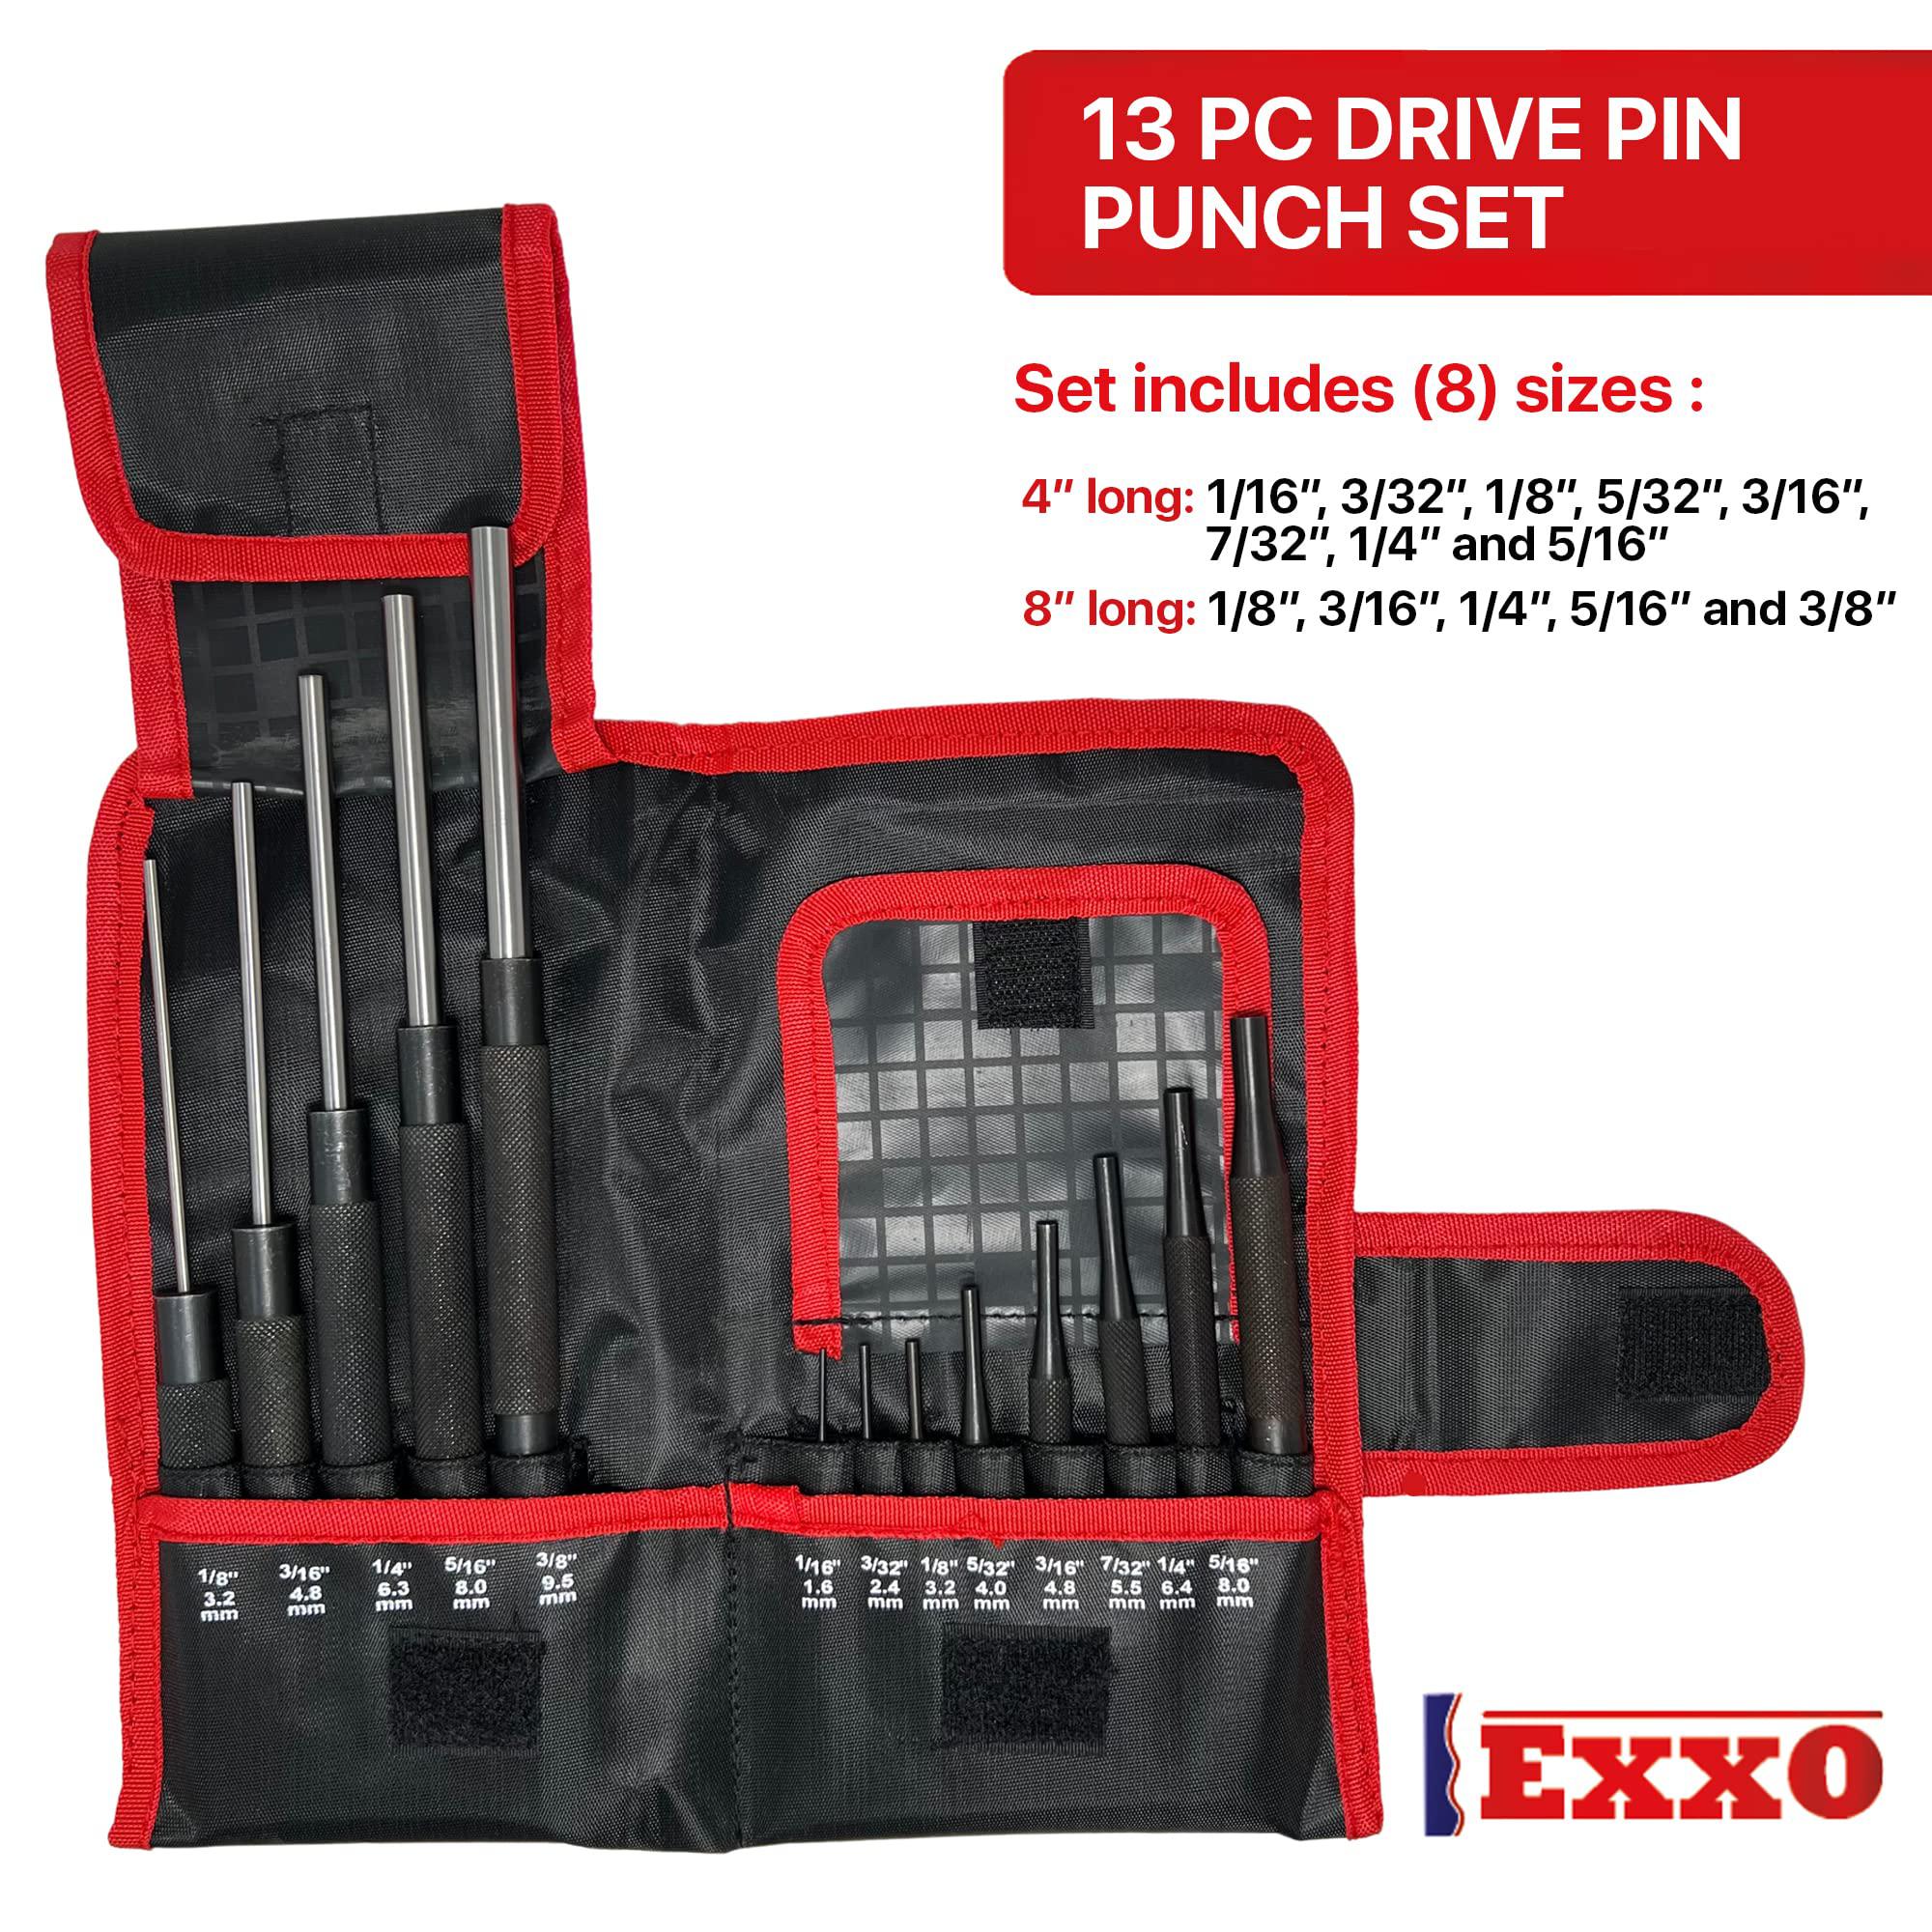 exxo tools pin punch set - 13 piece drive pin set punch tool mini tool kit hole puncher sets roll pin punch set with holder c